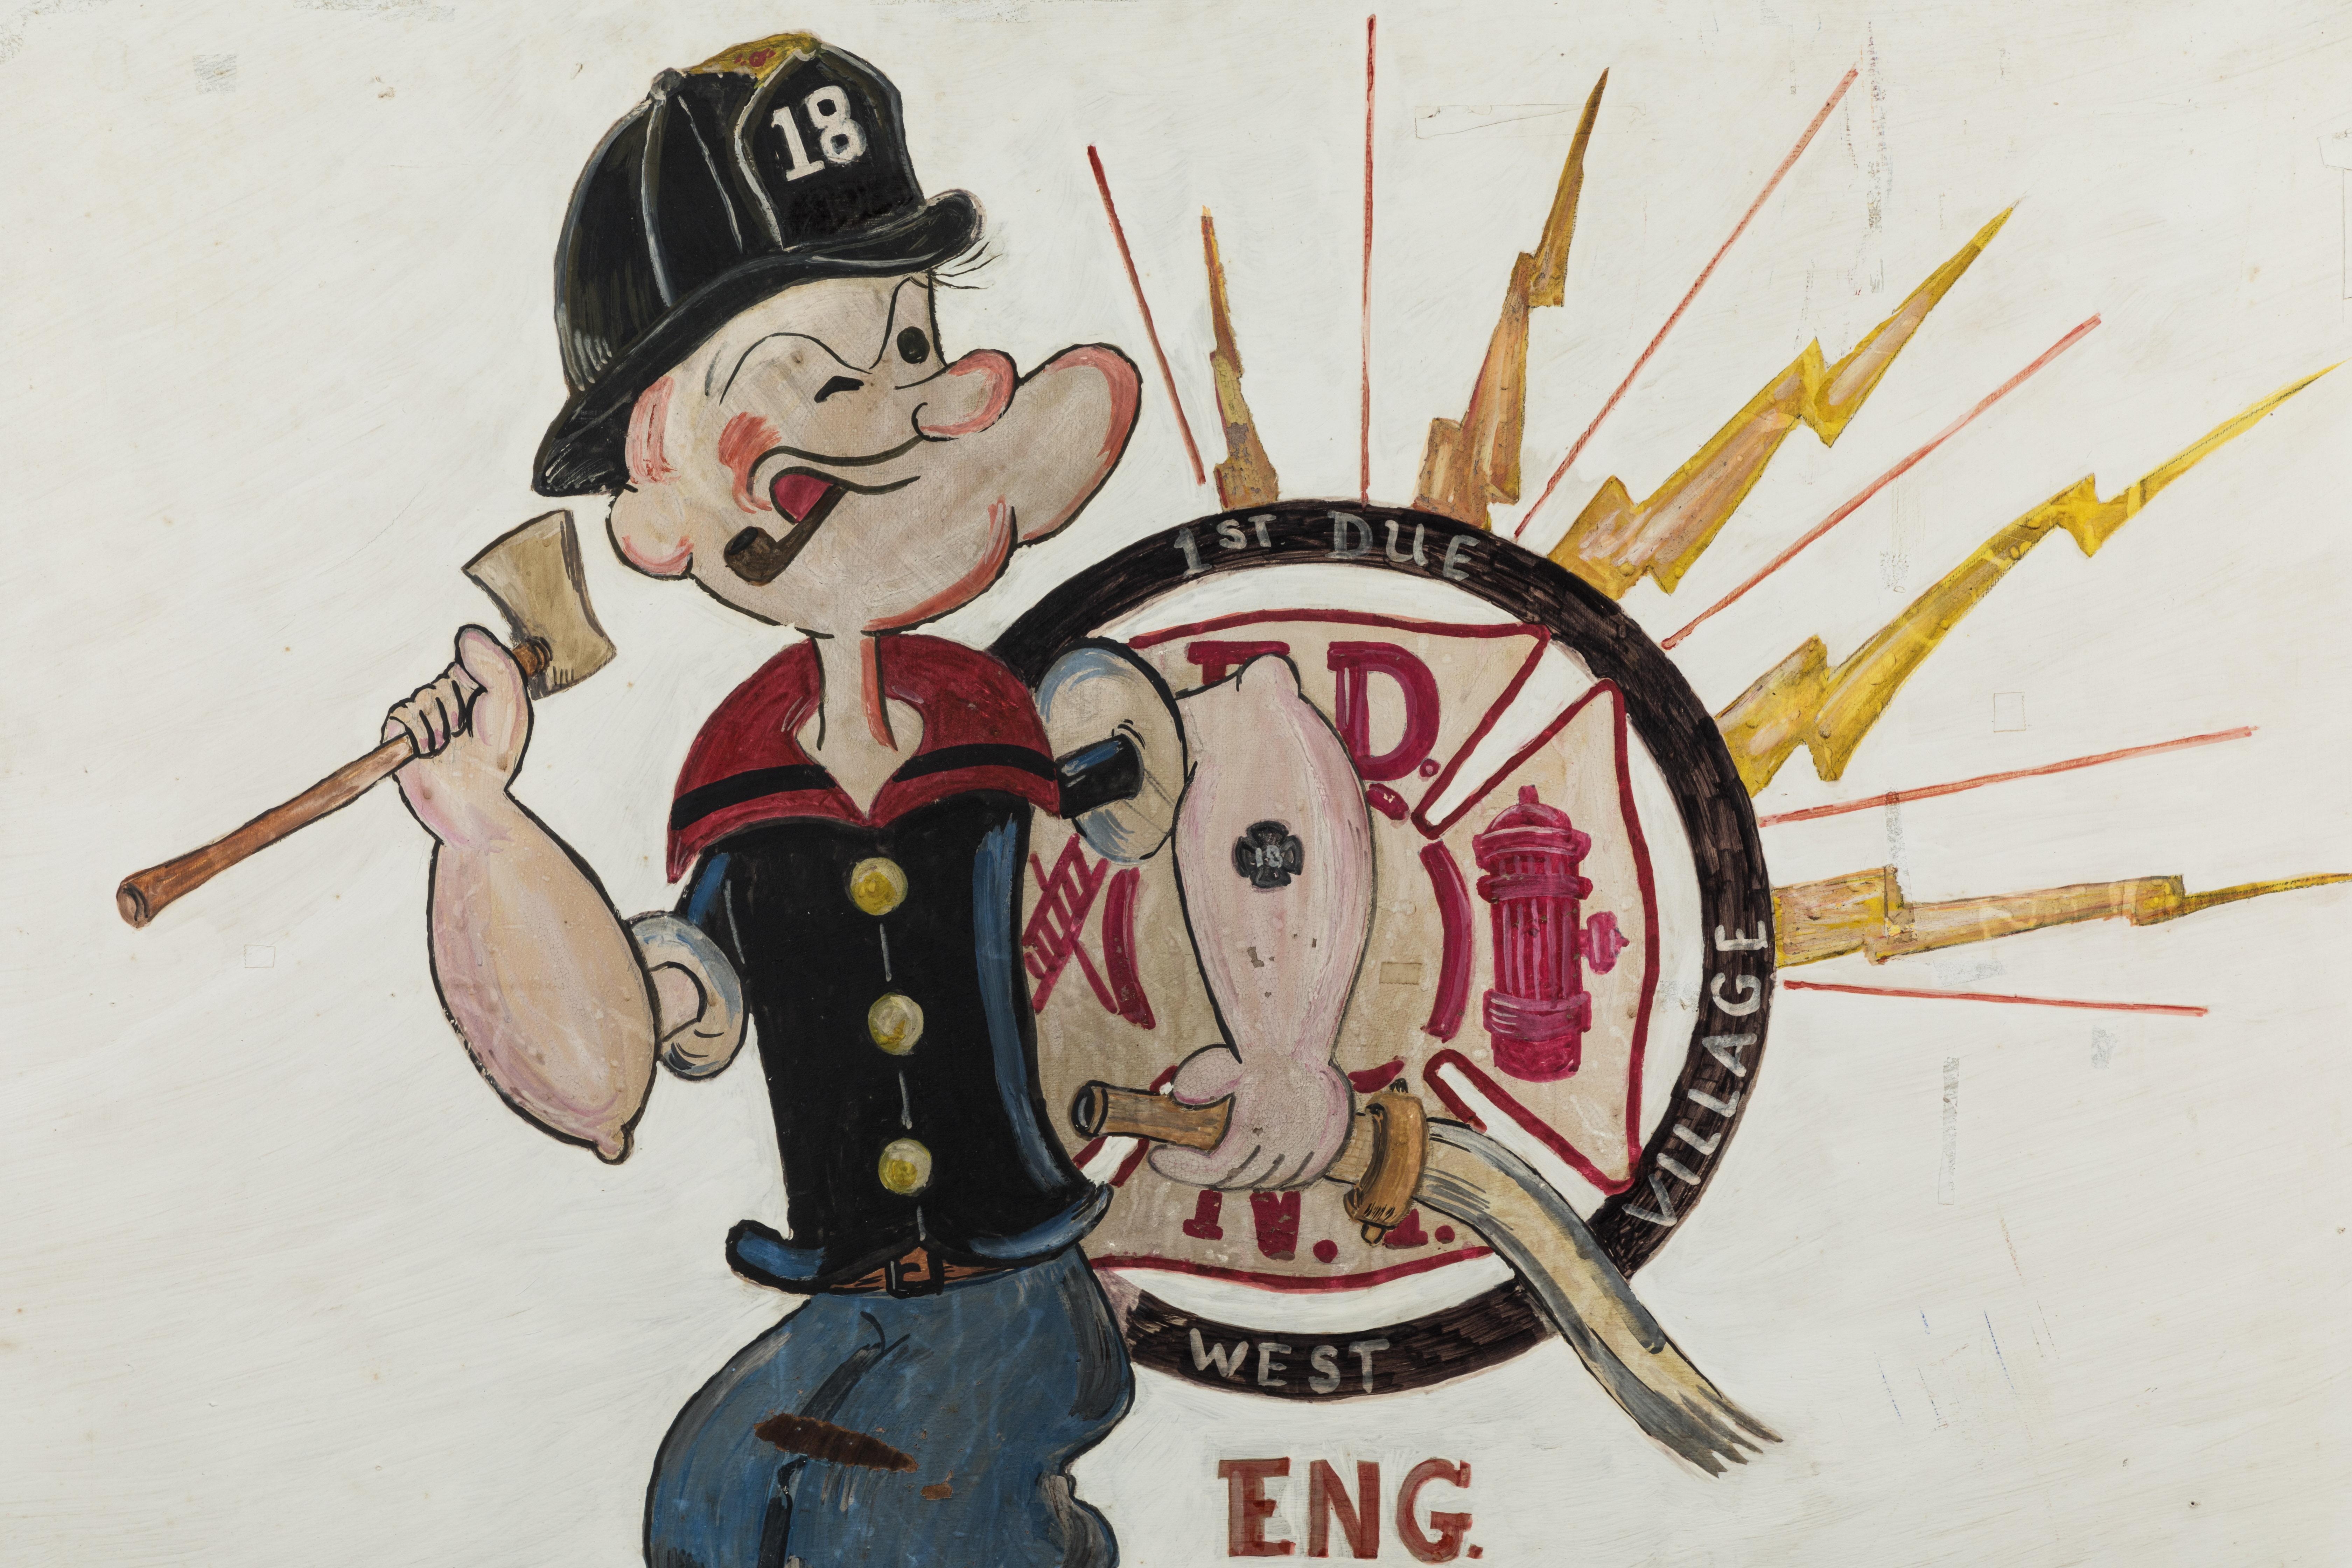 Great Folk Art painting from New York City. FDNY West Village Engine Company #18. Hand painted on masonite. Engine 18 is represented on Popeye's fire helmut and forearm tattoo. Fun piece of New York City FDNY memorabilia.